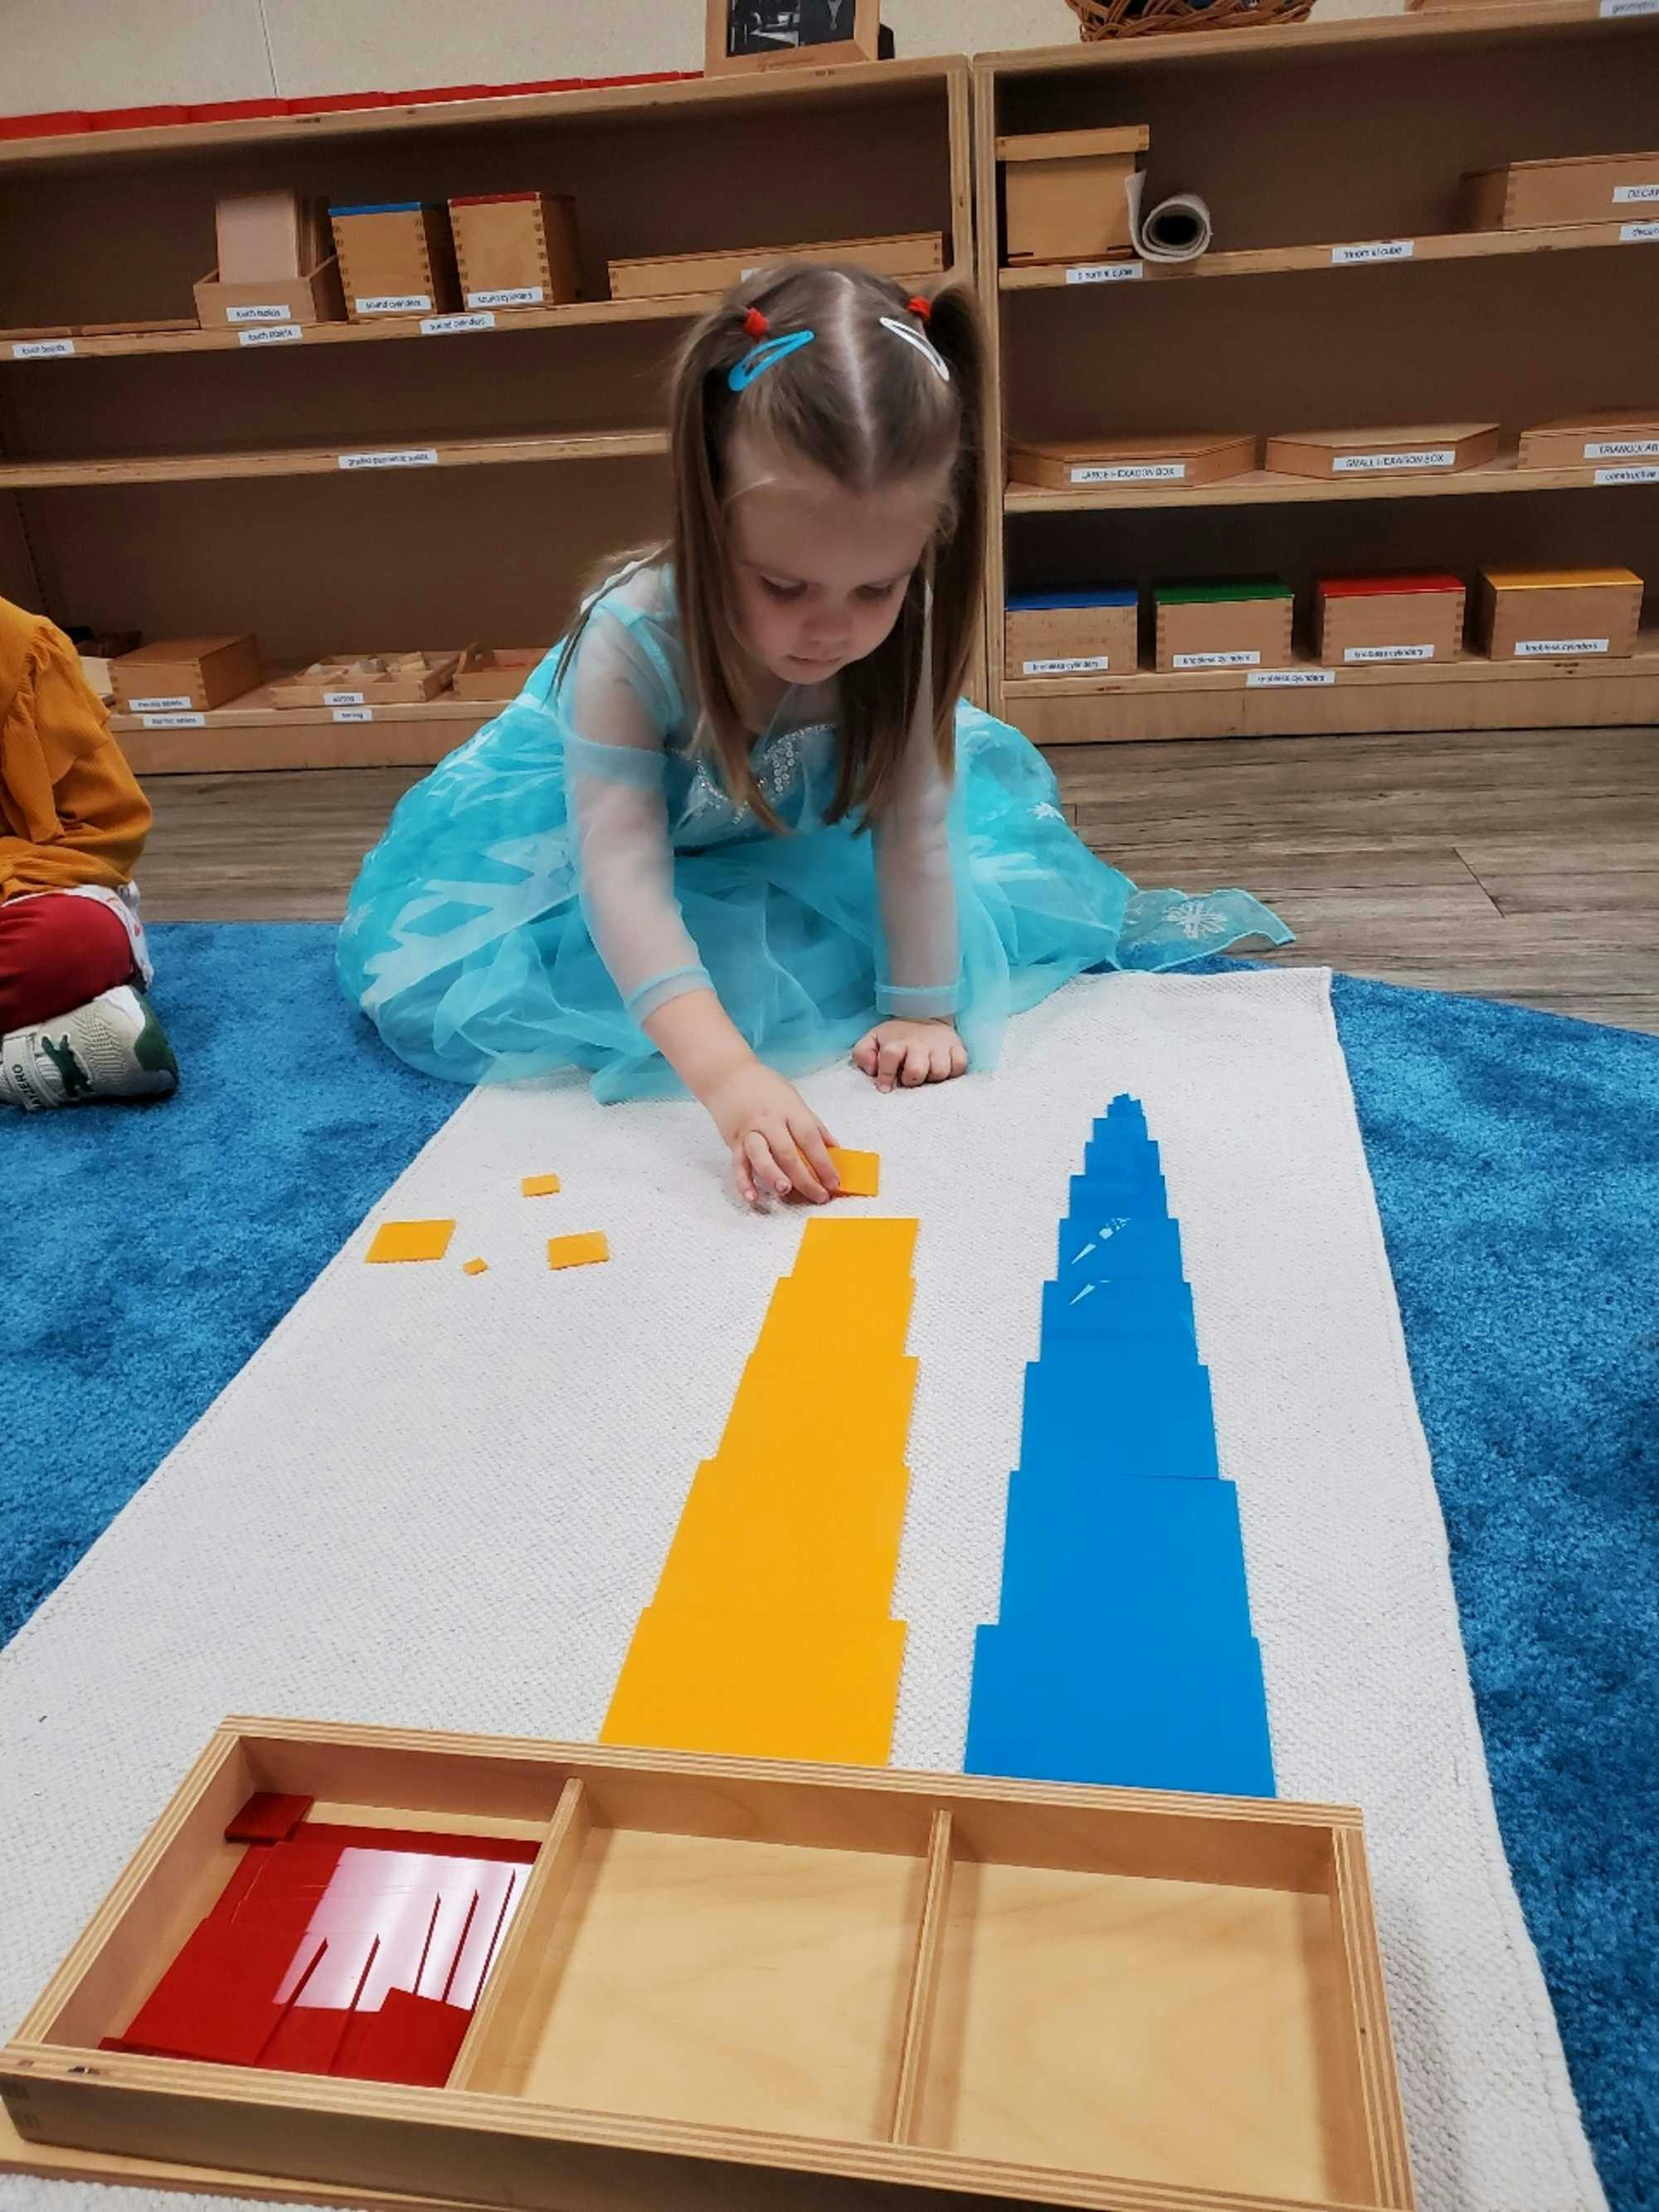 Children in a well-organized mixed-age Montessori classroom ponder over an activity using blocks of different sizes, classic Montessori classroom materials